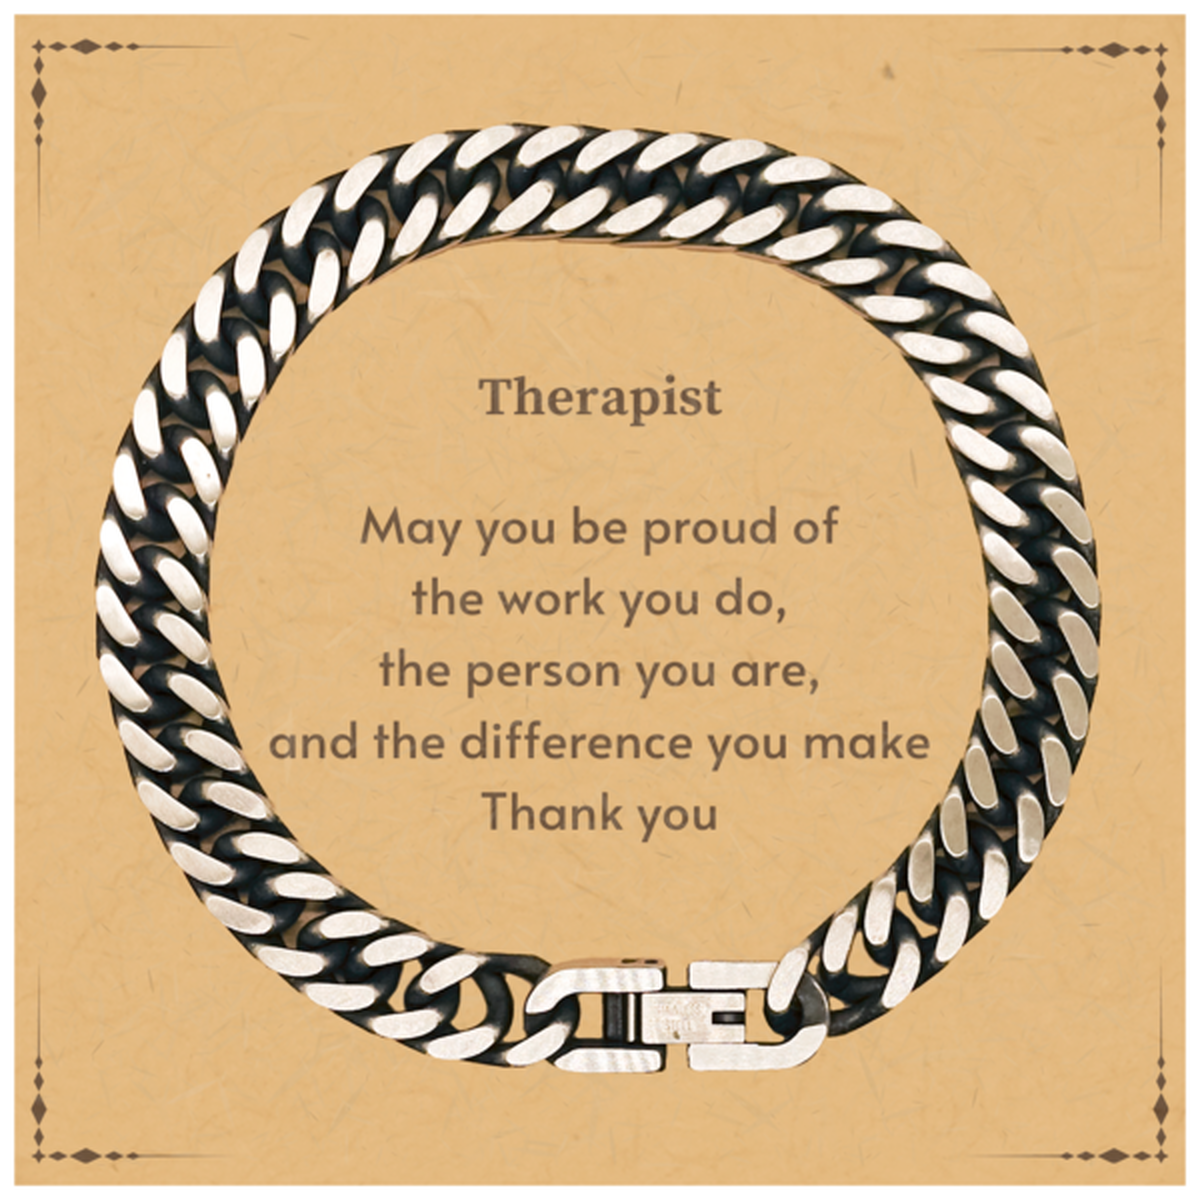 Heartwarming Cuban Link Chain Bracelet Retirement Coworkers Gifts for Therapist, Therapist May You be proud of the work you do, the person you are Gifts for Boss Men Women Friends